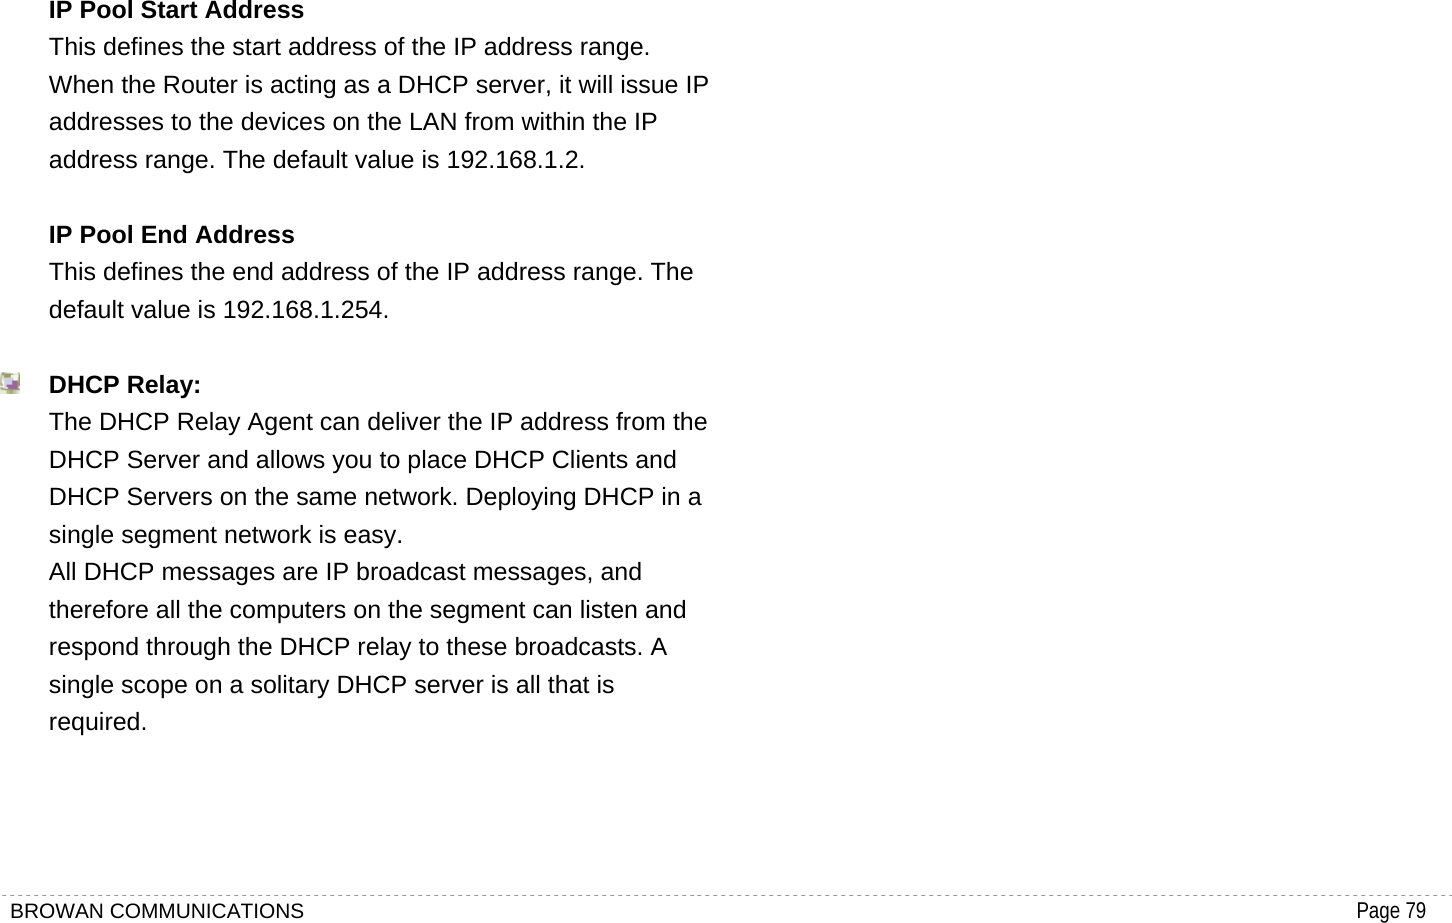 BROWAN COMMUNICATIONS                                                                                           Page 79  IP Pool Start Address This defines the start address of the IP address range. When the Router is acting as a DHCP server, it will issue IP addresses to the devices on the LAN from within the IP address range. The default value is 192.168.1.2.  IP Pool End Address  This defines the end address of the IP address range. The default value is 192.168.1.254.   DHCP Relay: The DHCP Relay Agent can deliver the IP address from the DHCP Server and allows you to place DHCP Clients and DHCP Servers on the same network. Deploying DHCP in a single segment network is easy.   All DHCP messages are IP broadcast messages, and therefore all the computers on the segment can listen and respond through the DHCP relay to these broadcasts. A single scope on a solitary DHCP server is all that is required.    